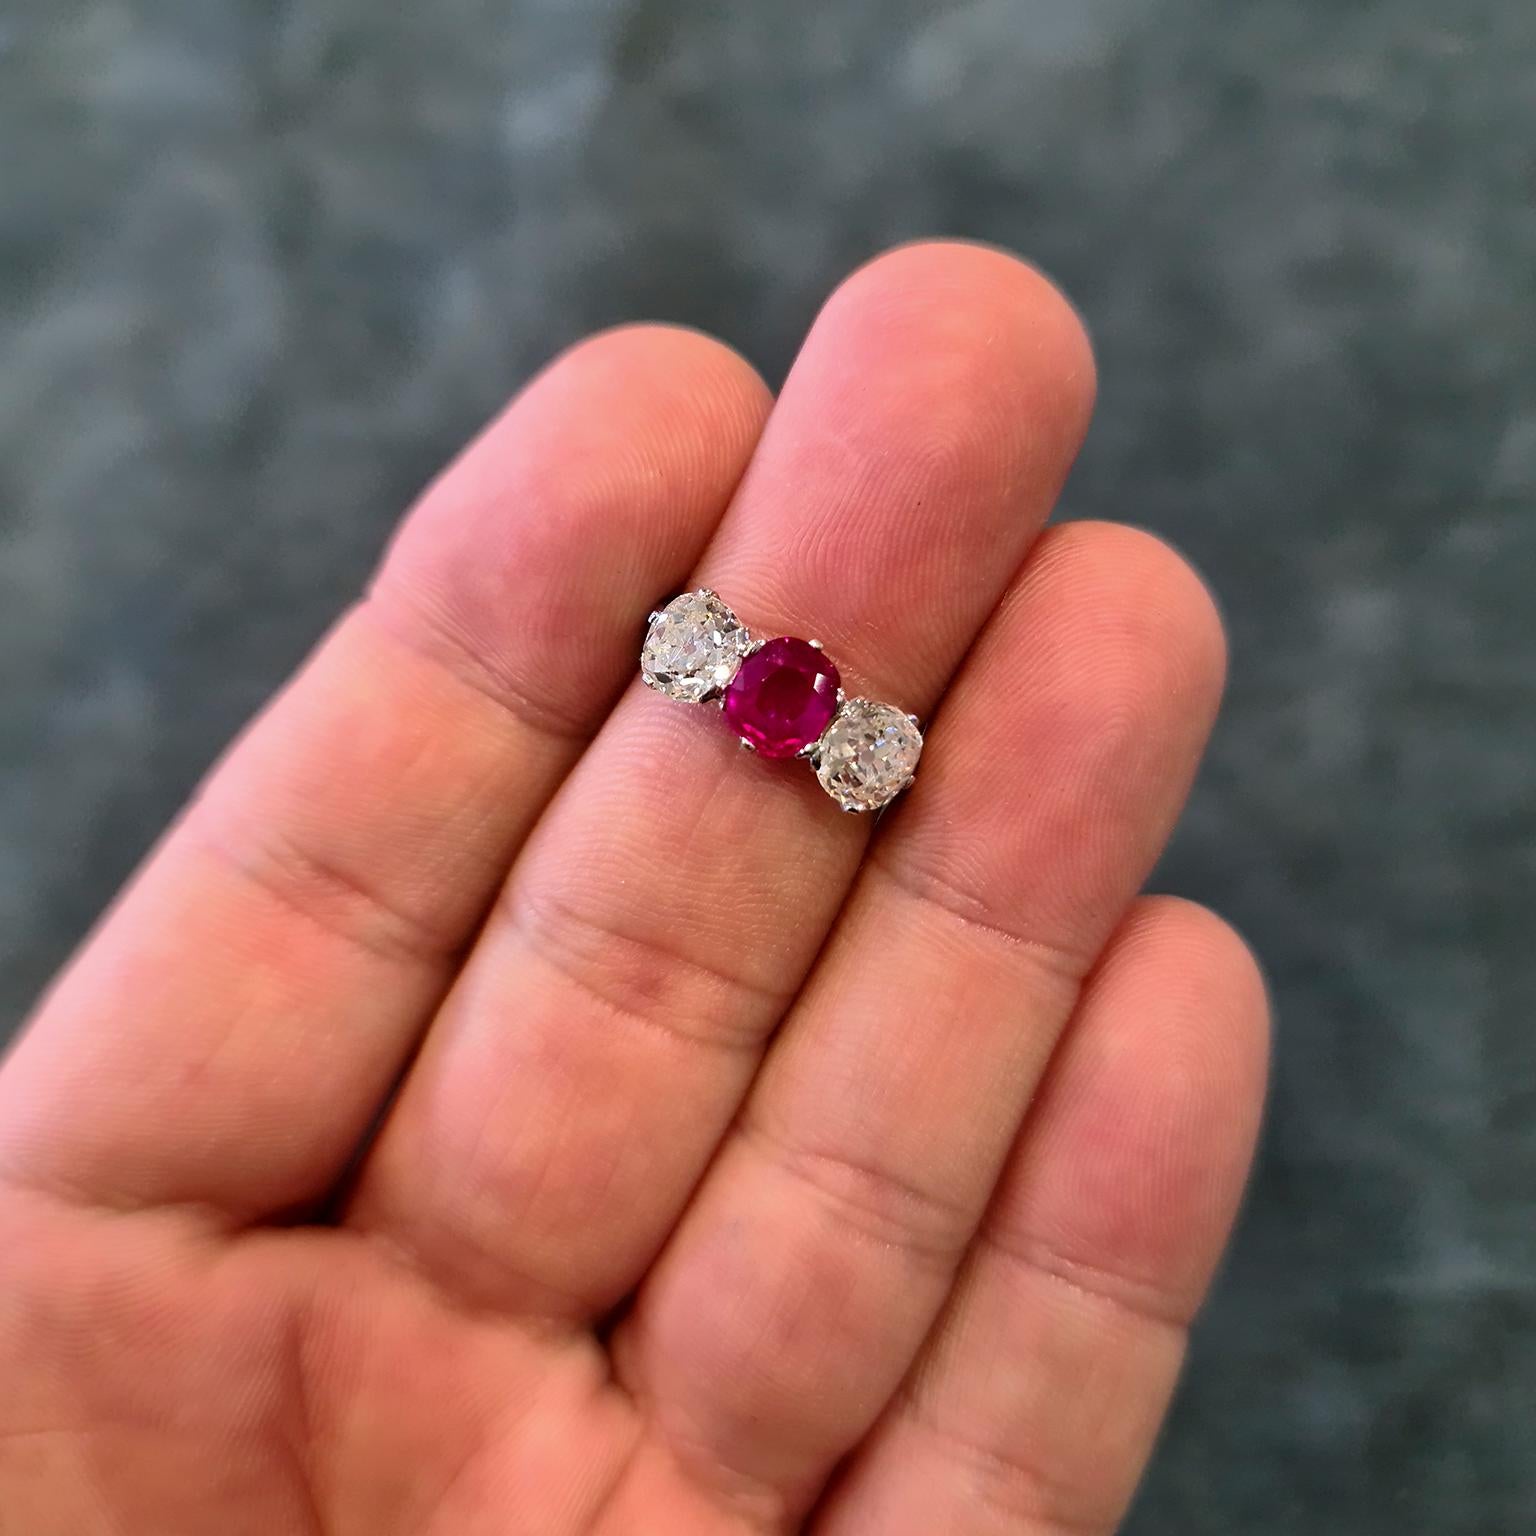 An exquisite early 20th century platinum three stone ring, featuring a central blood-red, unheated Burma ruby of approximately 1.10 carat, flanked on either side by an old-cut diamond. Total diamond carat weight of approximately 2.50 carats, H-I